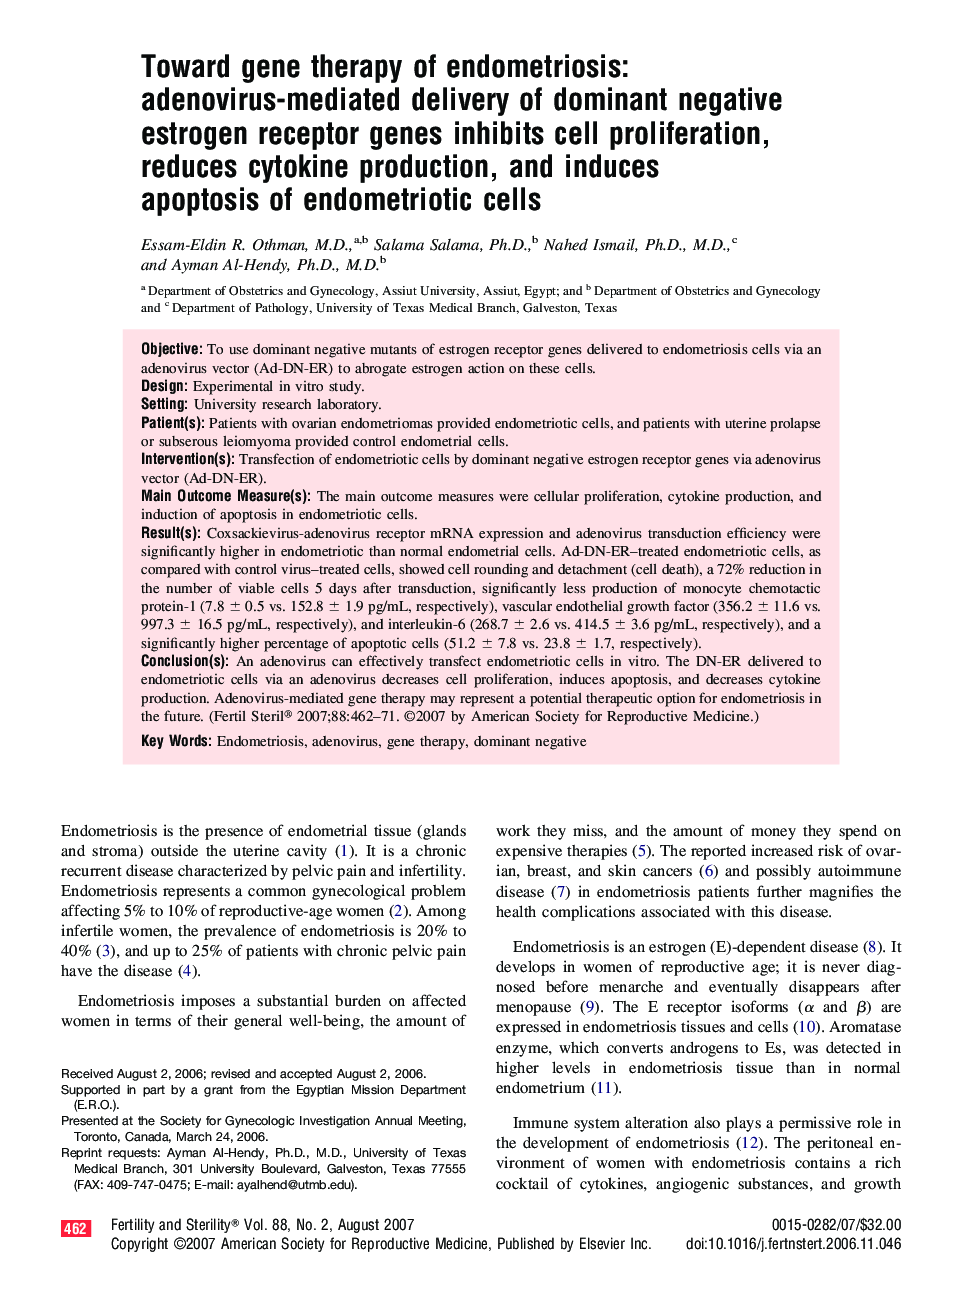 Toward gene therapy of endometriosis: adenovirus-mediated delivery of dominant negative estrogen receptor genes inhibits cell proliferation, reduces cytokine production, and induces apoptosis of endometriotic cells 